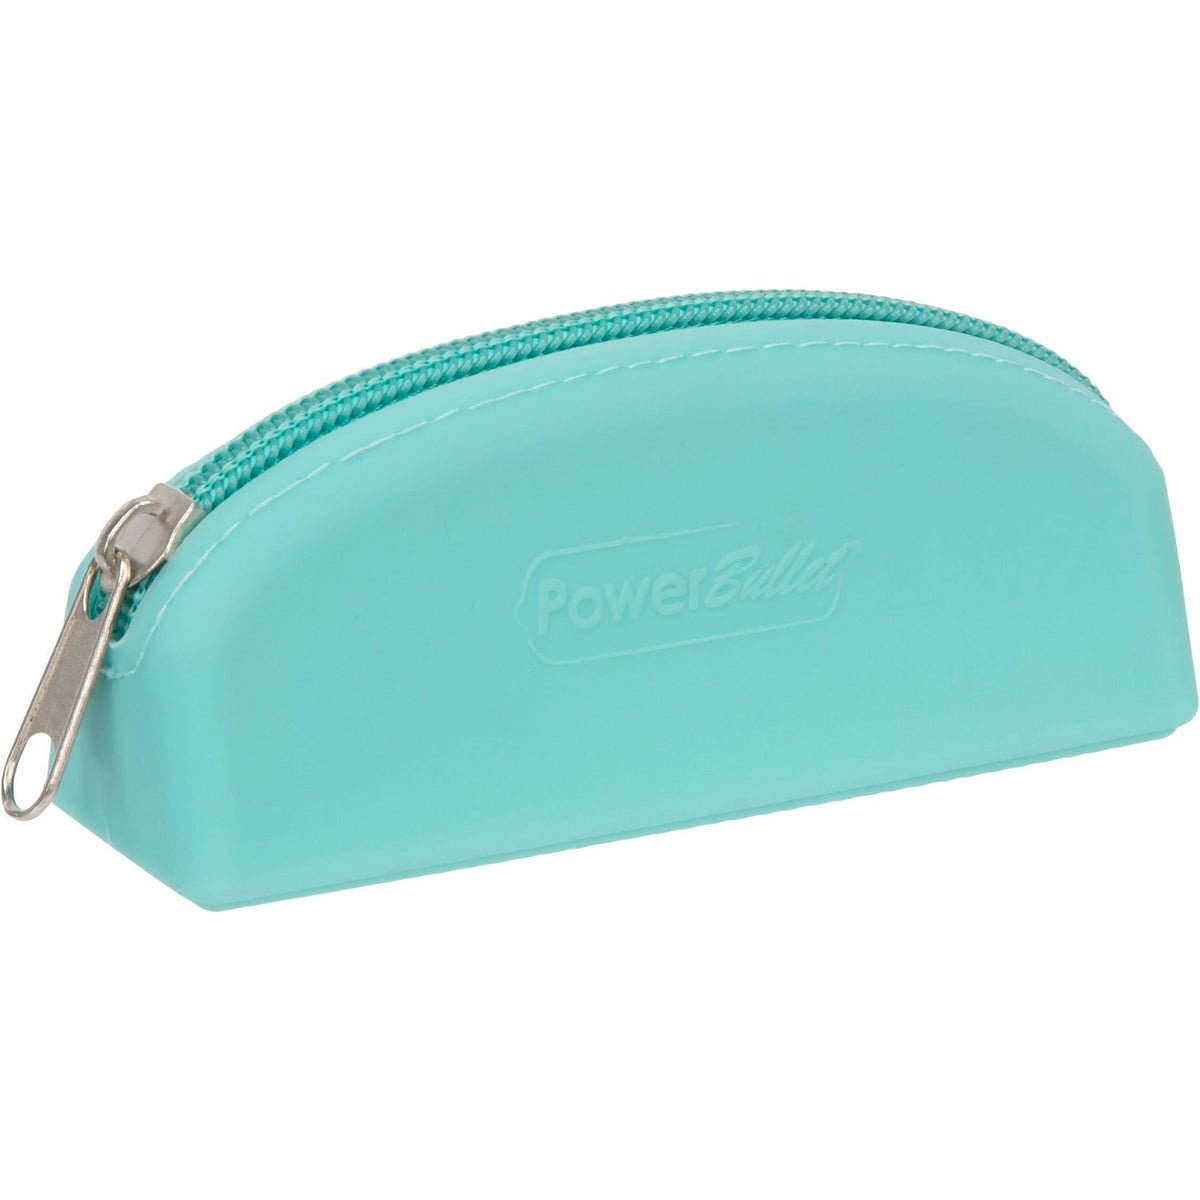 PowerBullet Silicone Zippered Bag - Teal